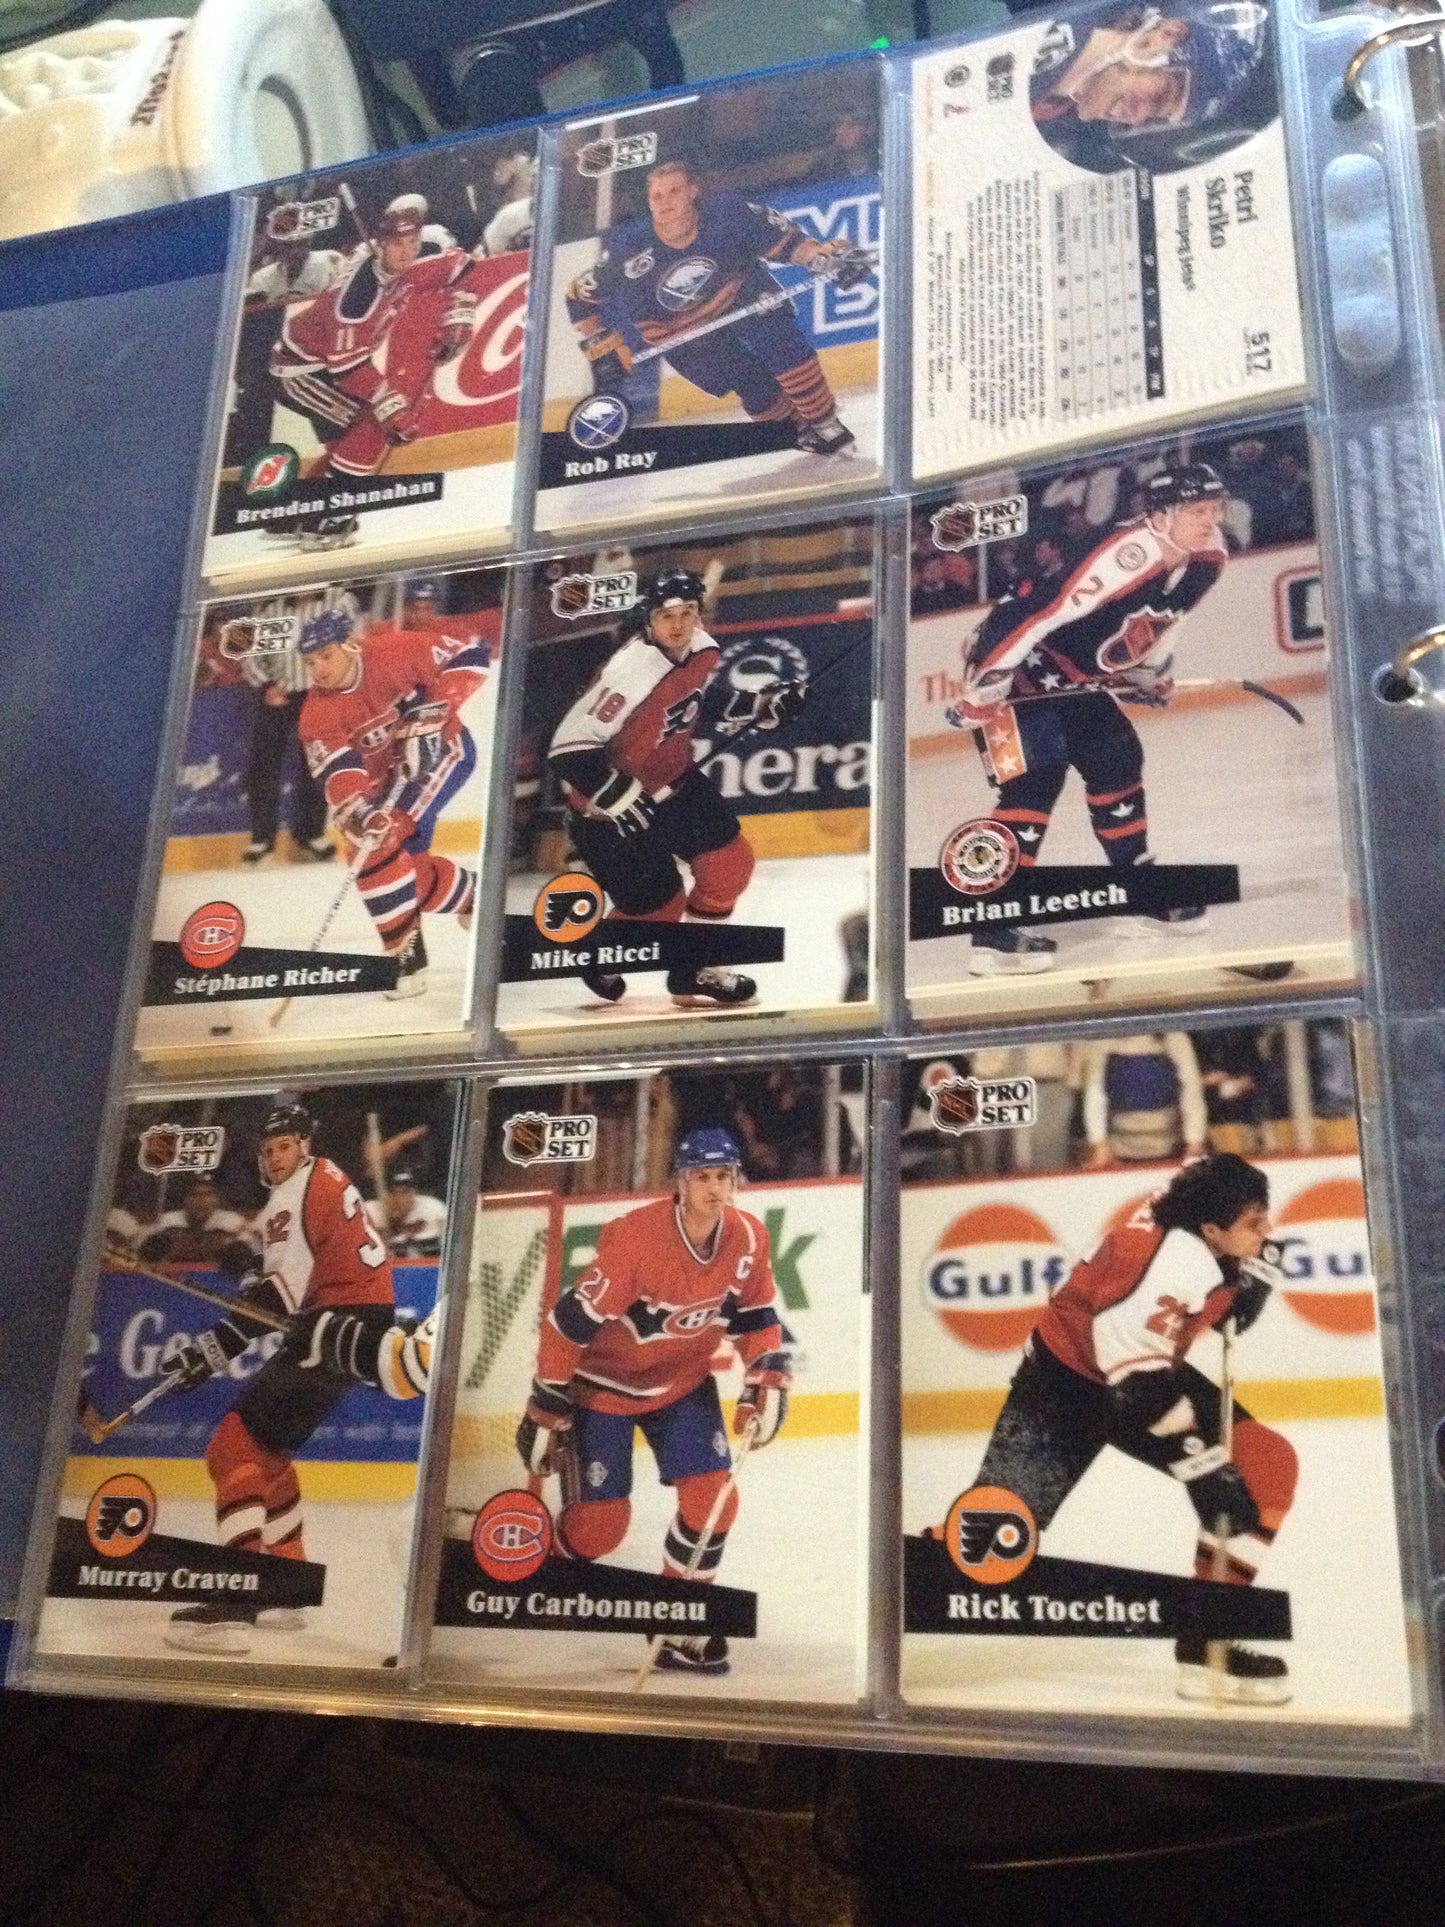 Hockey Cards: Pro Set [1990 - 1993] ***OVER 150 CARDS!*** BooksCardsNBikes